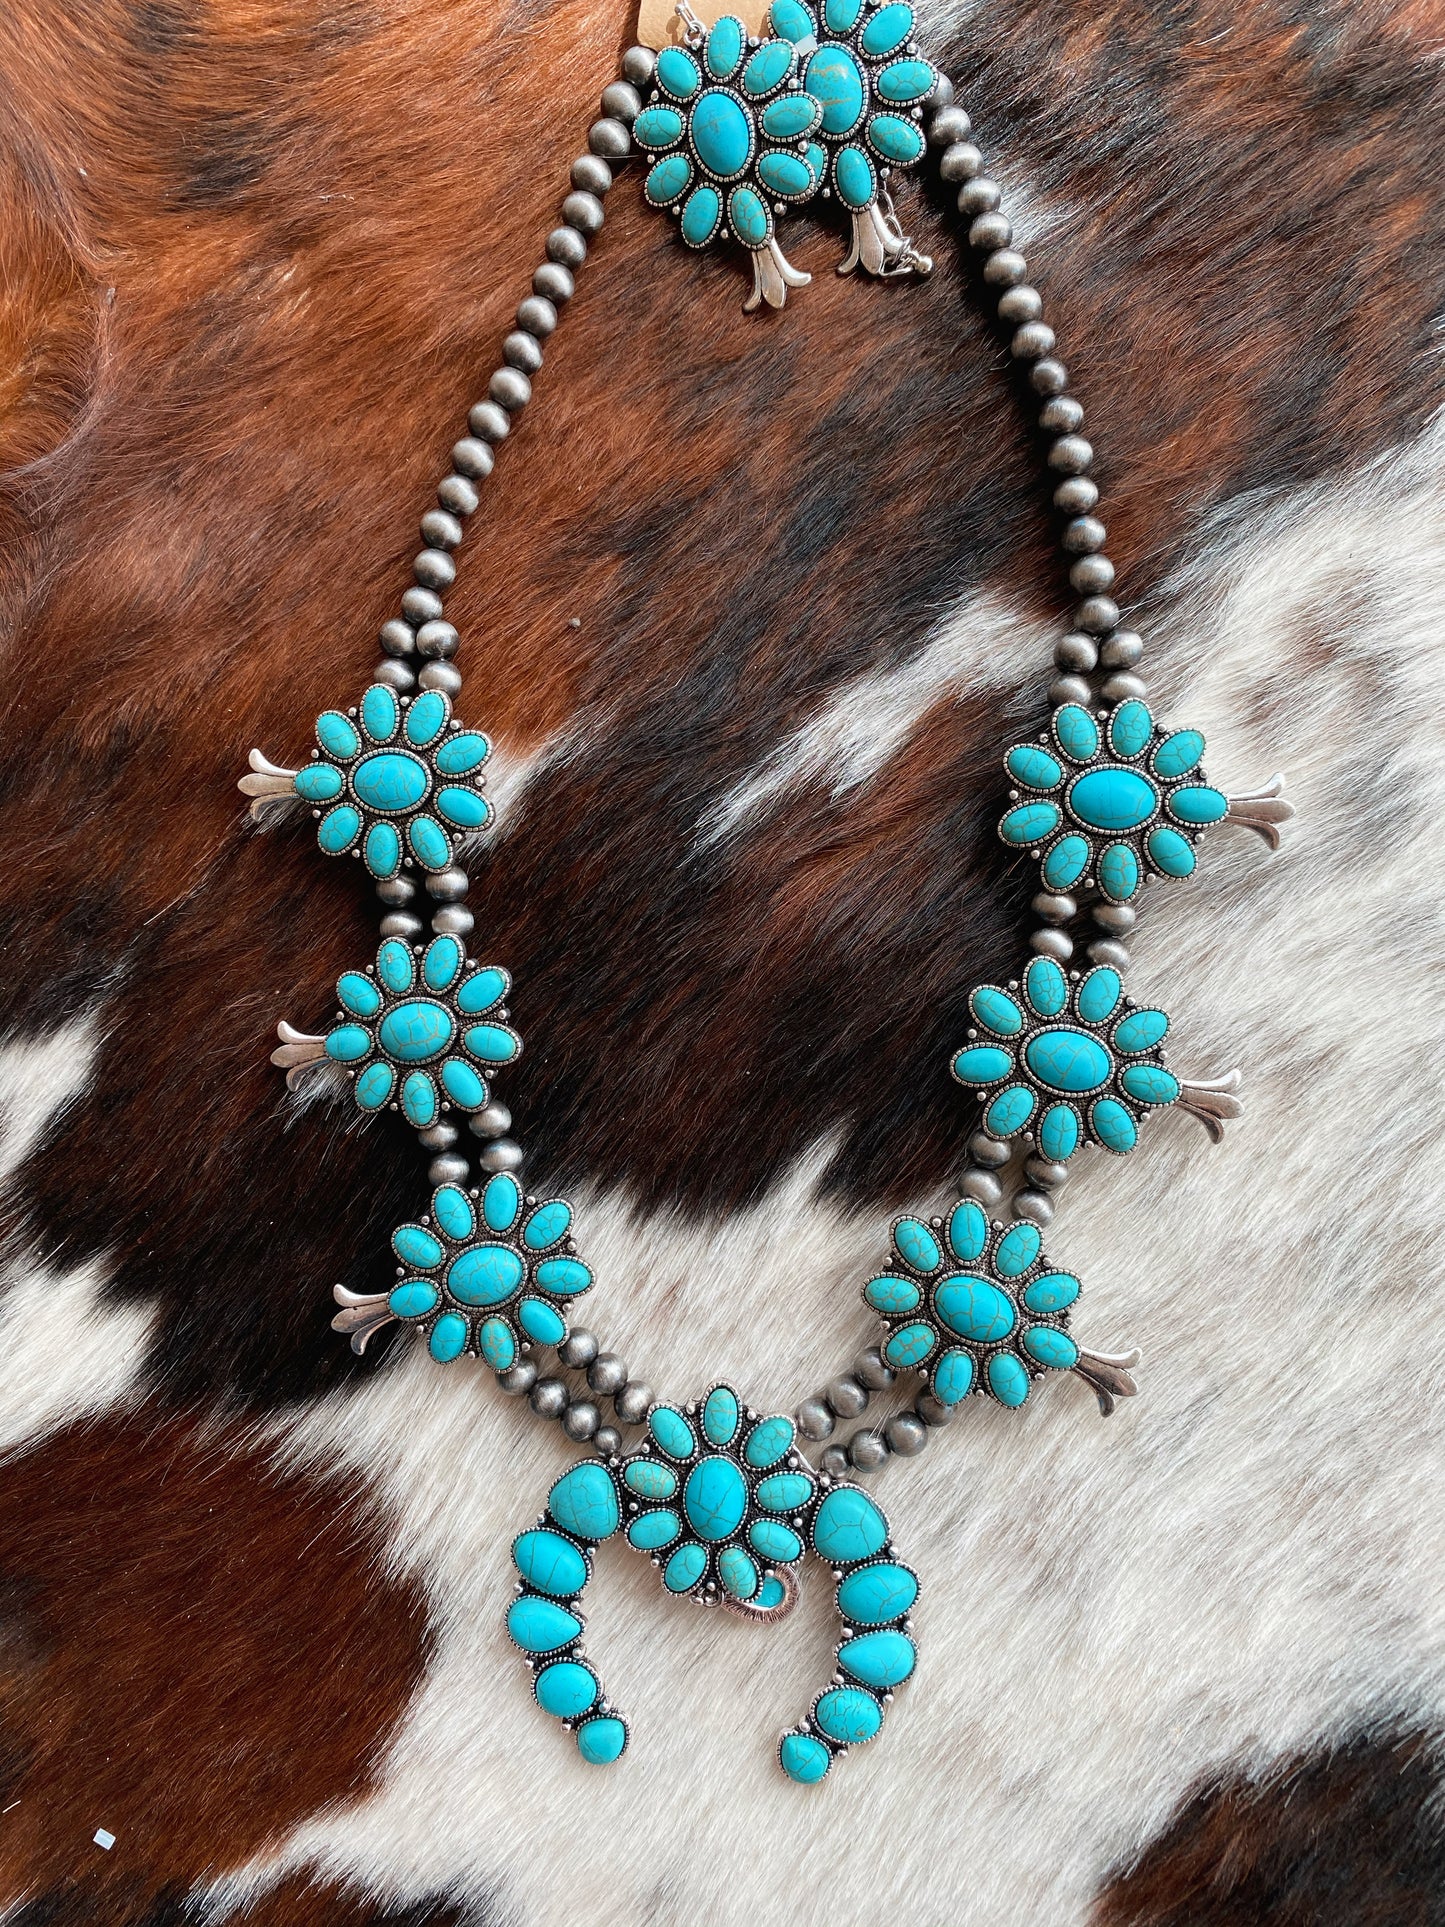 Turquoise Beaded Flower Squash Blossom Navajo Inspired Pearl Necklace and Earring Set